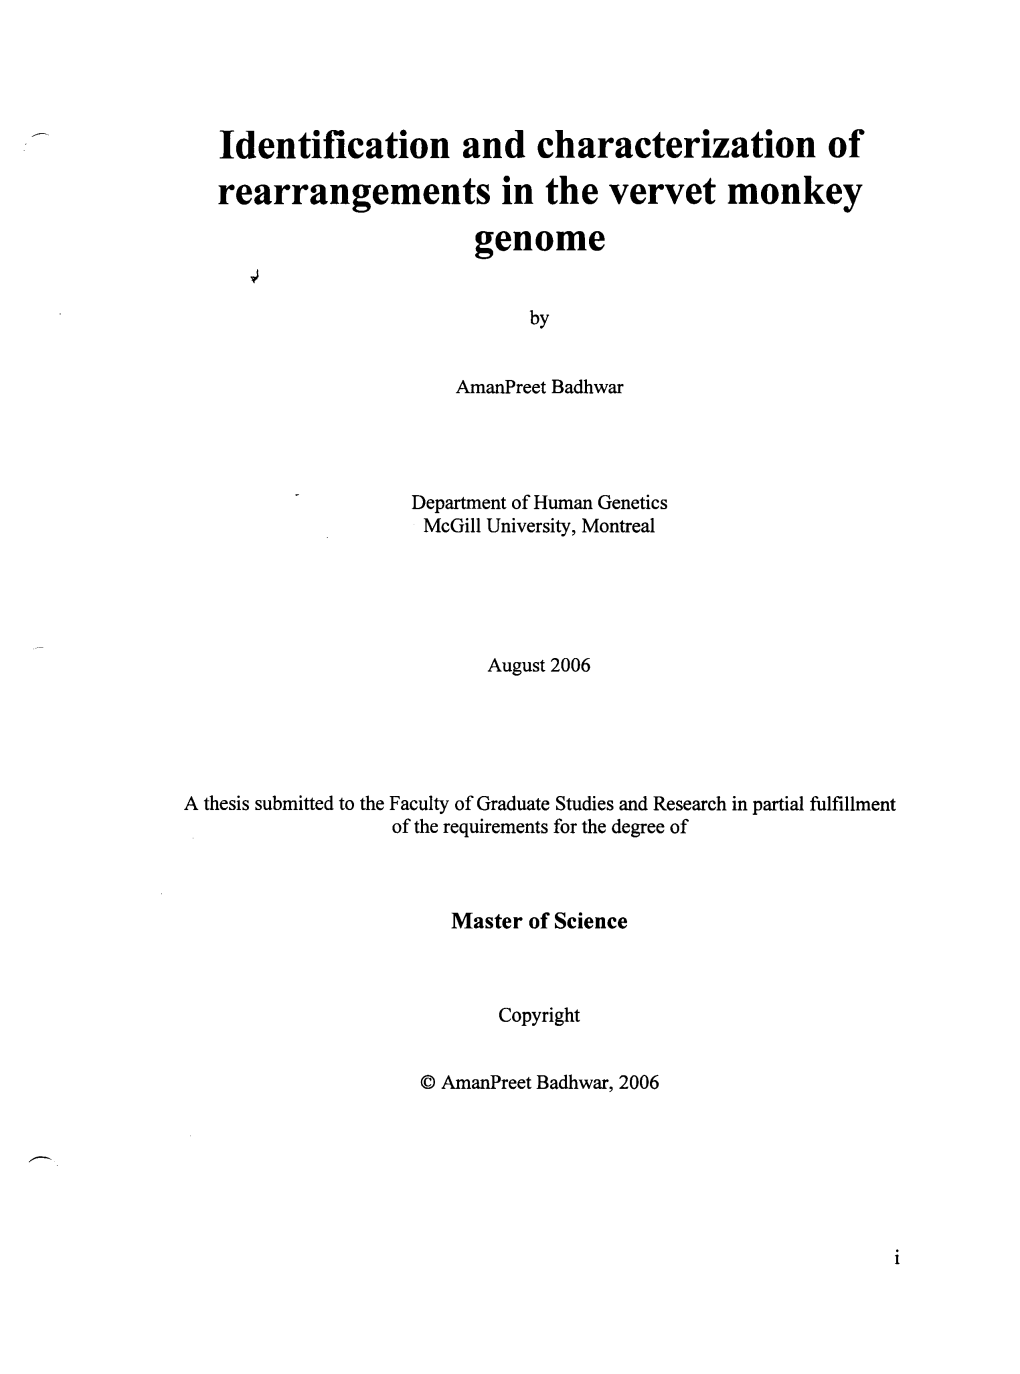 Identification and Characterization of Rearrangements in the Vervet Monkey Genome